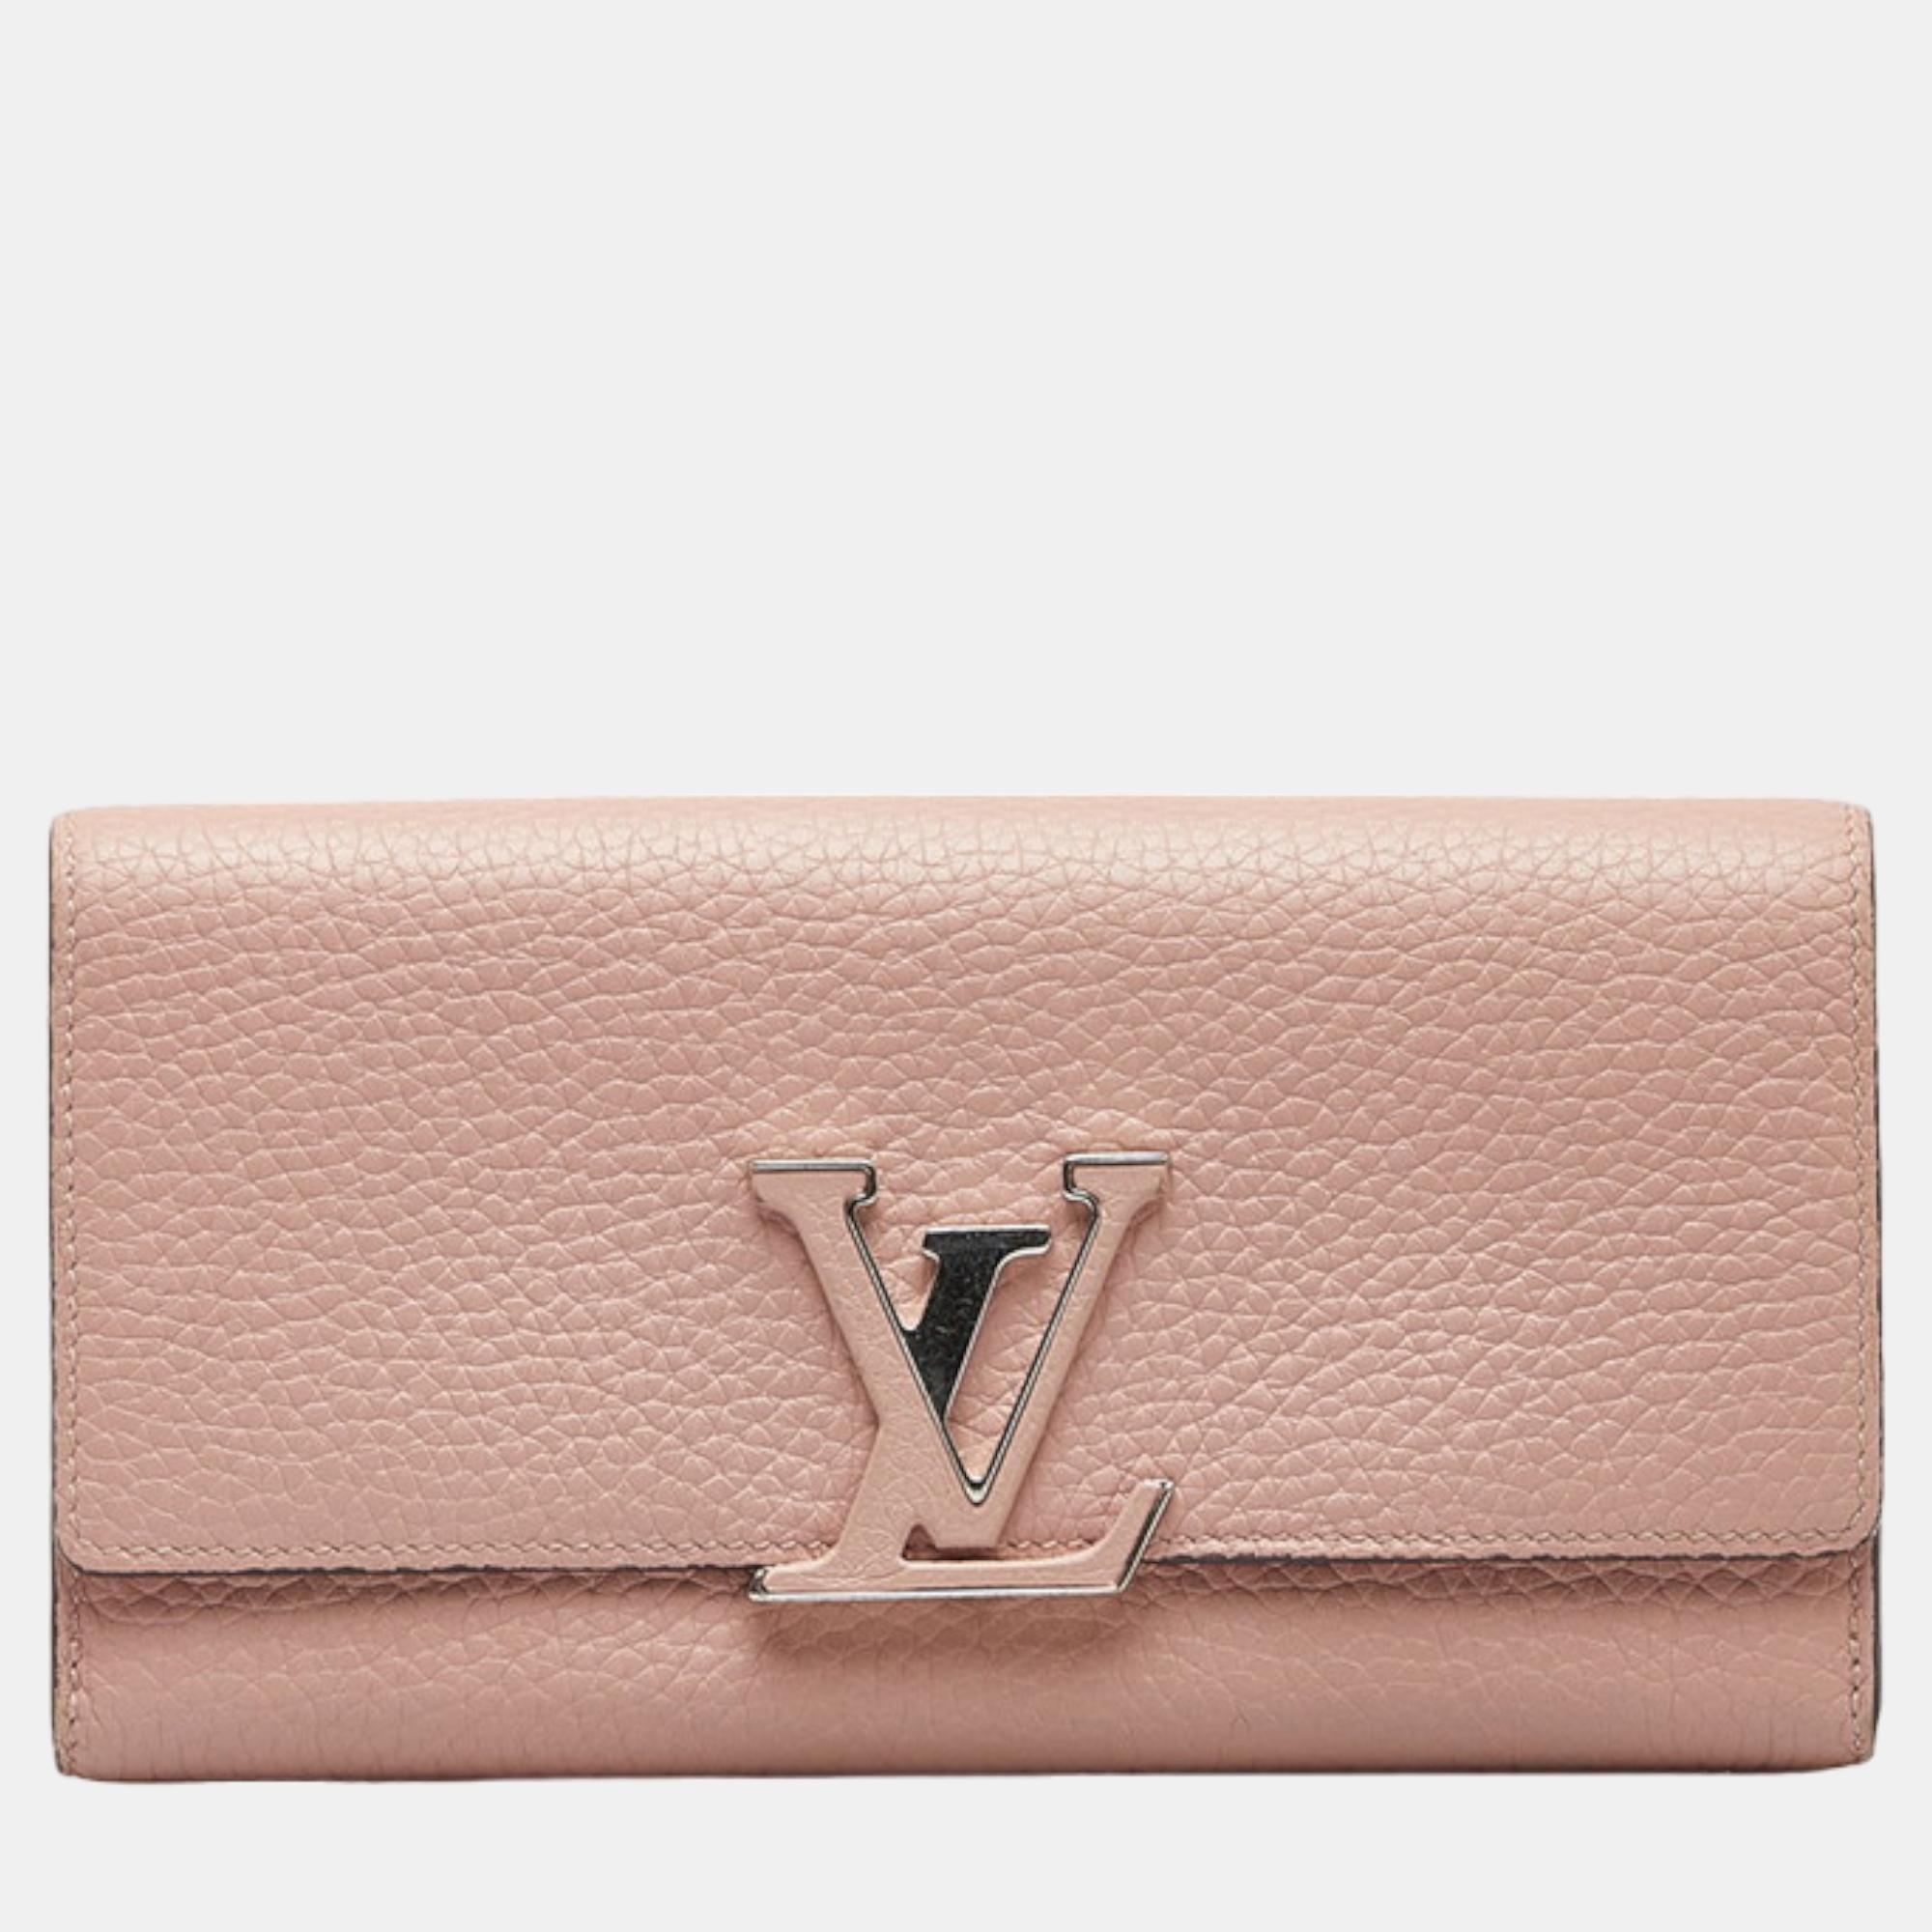 Pre-owned Louis Vuitton Pink Leather Taurillon Capucines Wallet Long Wallet